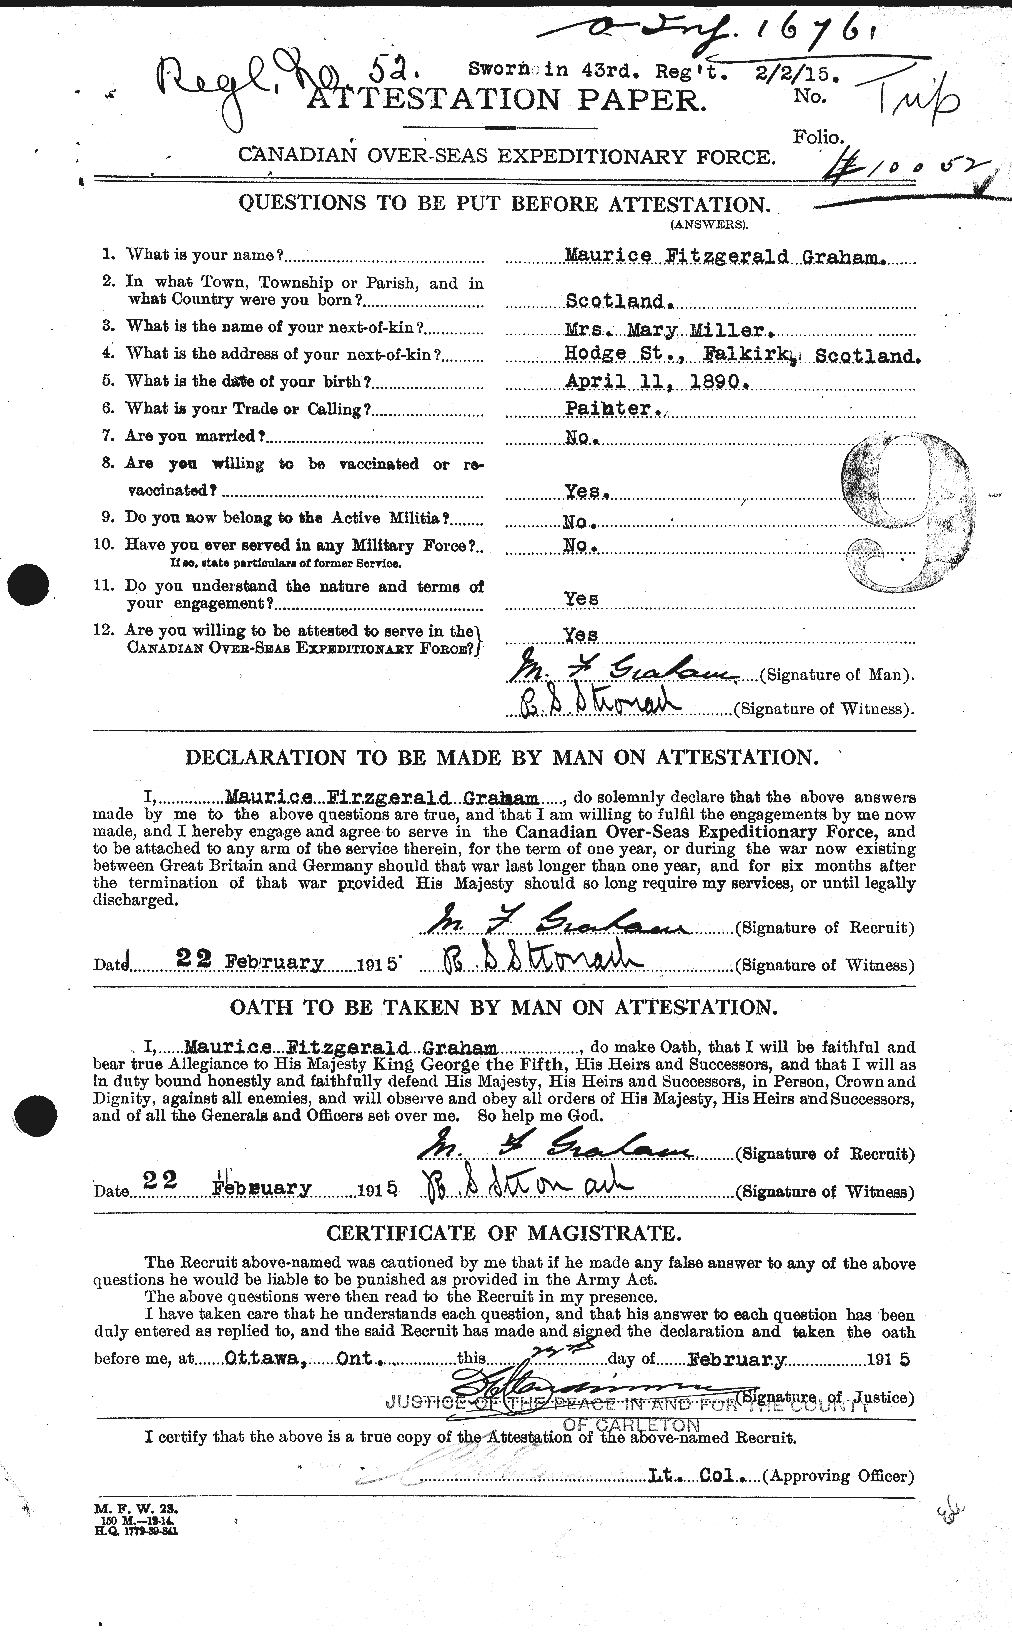 Personnel Records of the First World War - CEF 359298a